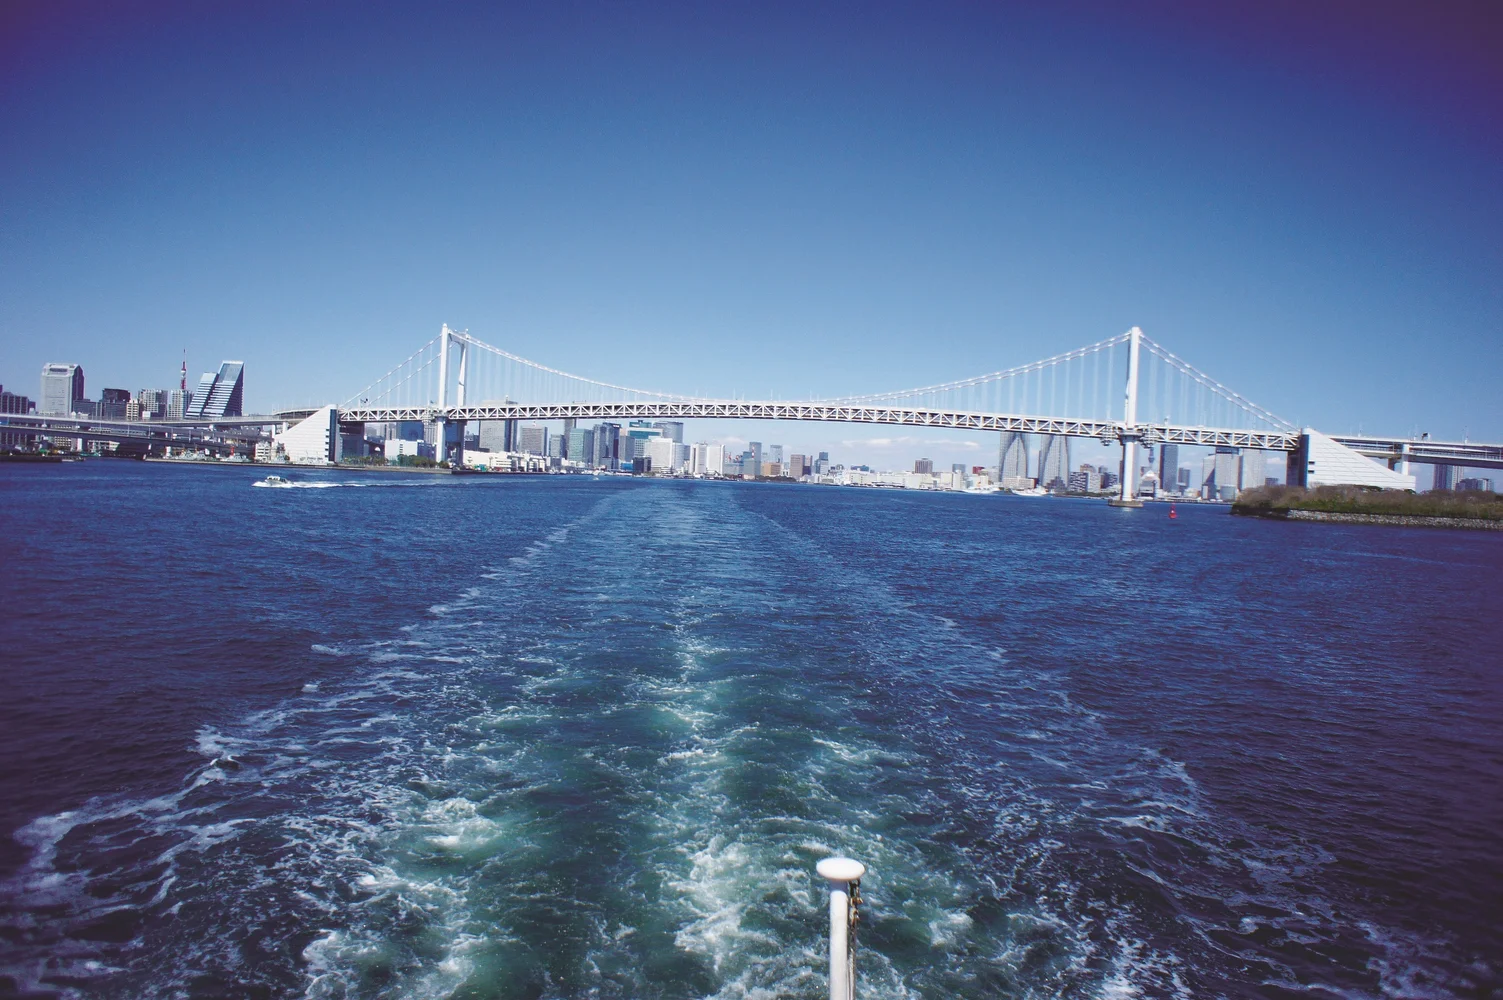 Tokyo Bay Sunset or Dinner Cruise With Full-Course French Meal [Window Seat]